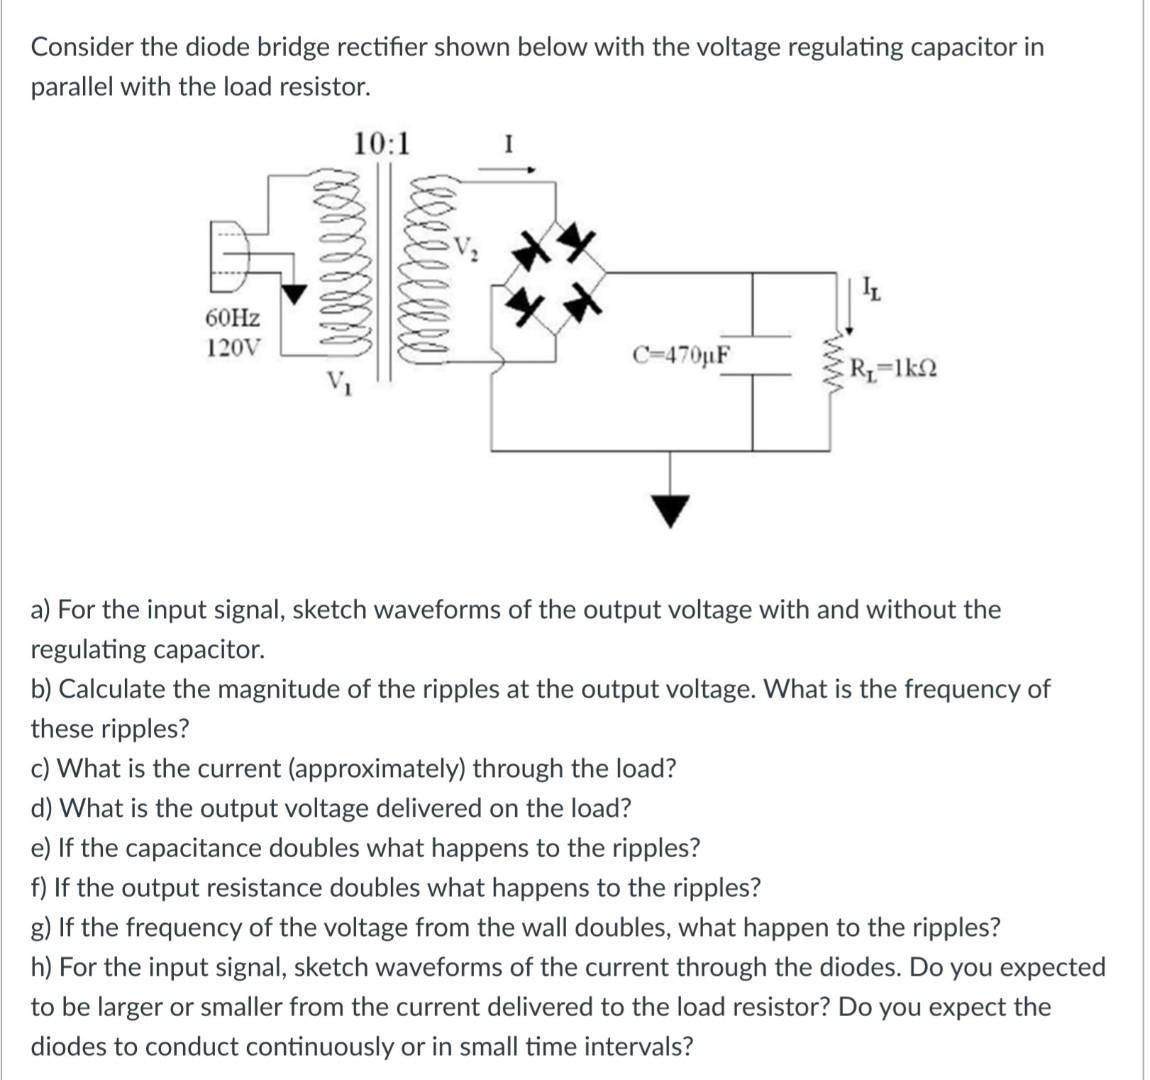 Consider the diode bridge rectifier shown below with the voltage regulating capacitor in parallel with the